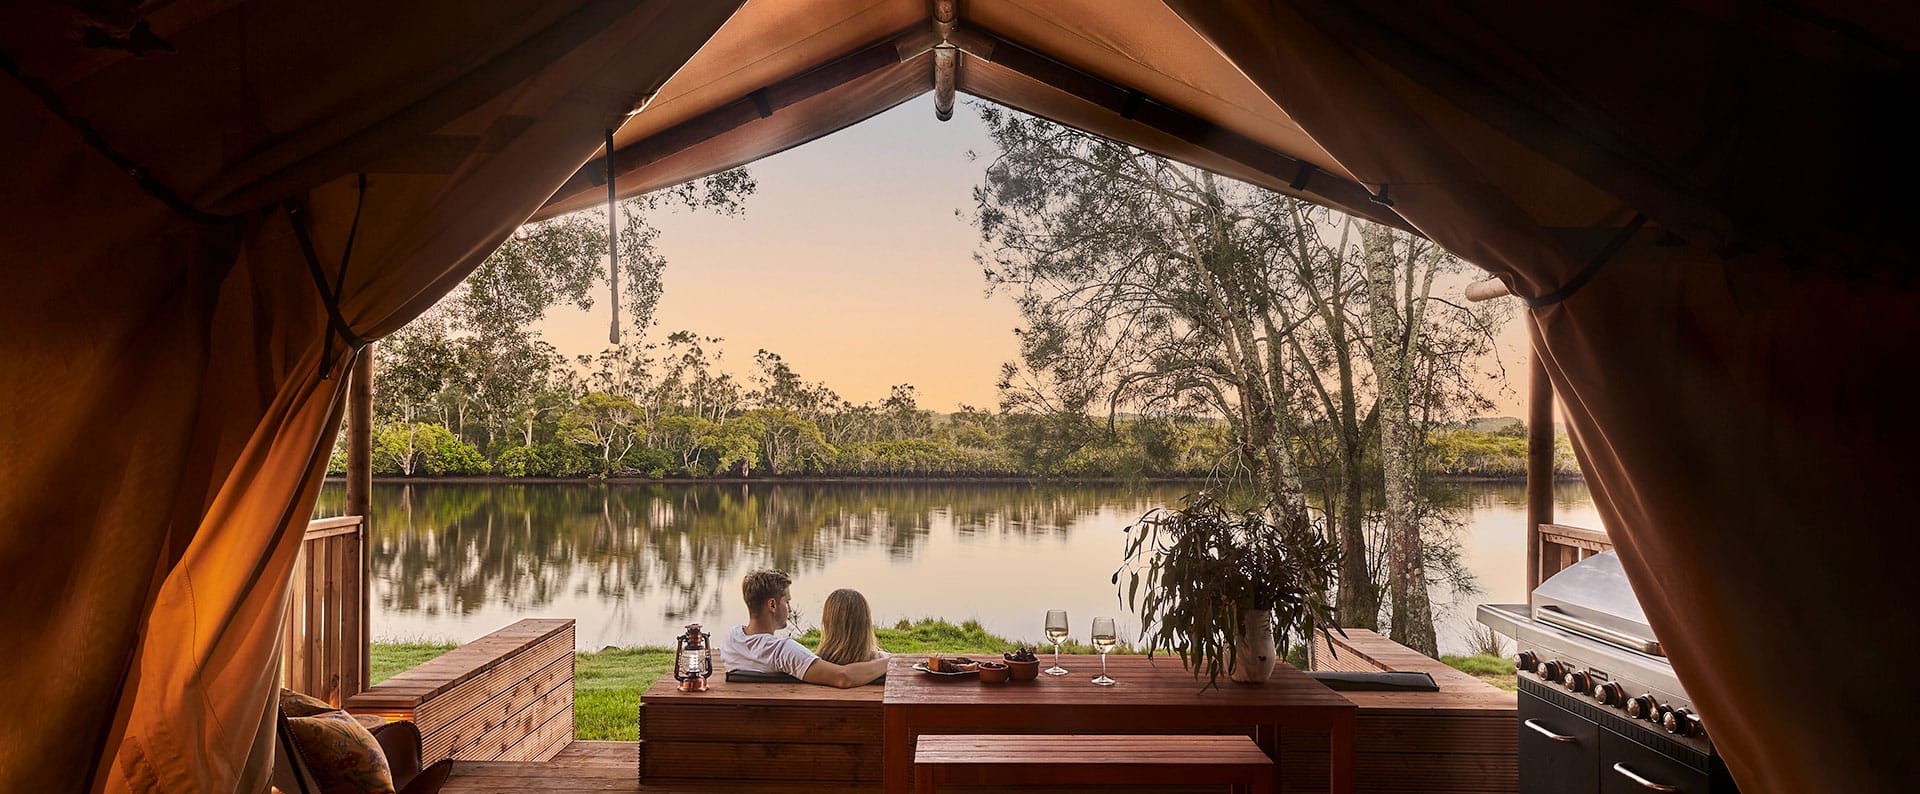 Myall River Camp Hawks Nest, luxury glamping experience nsw, safari-style glamping tents, sunken lounge overlooking the river